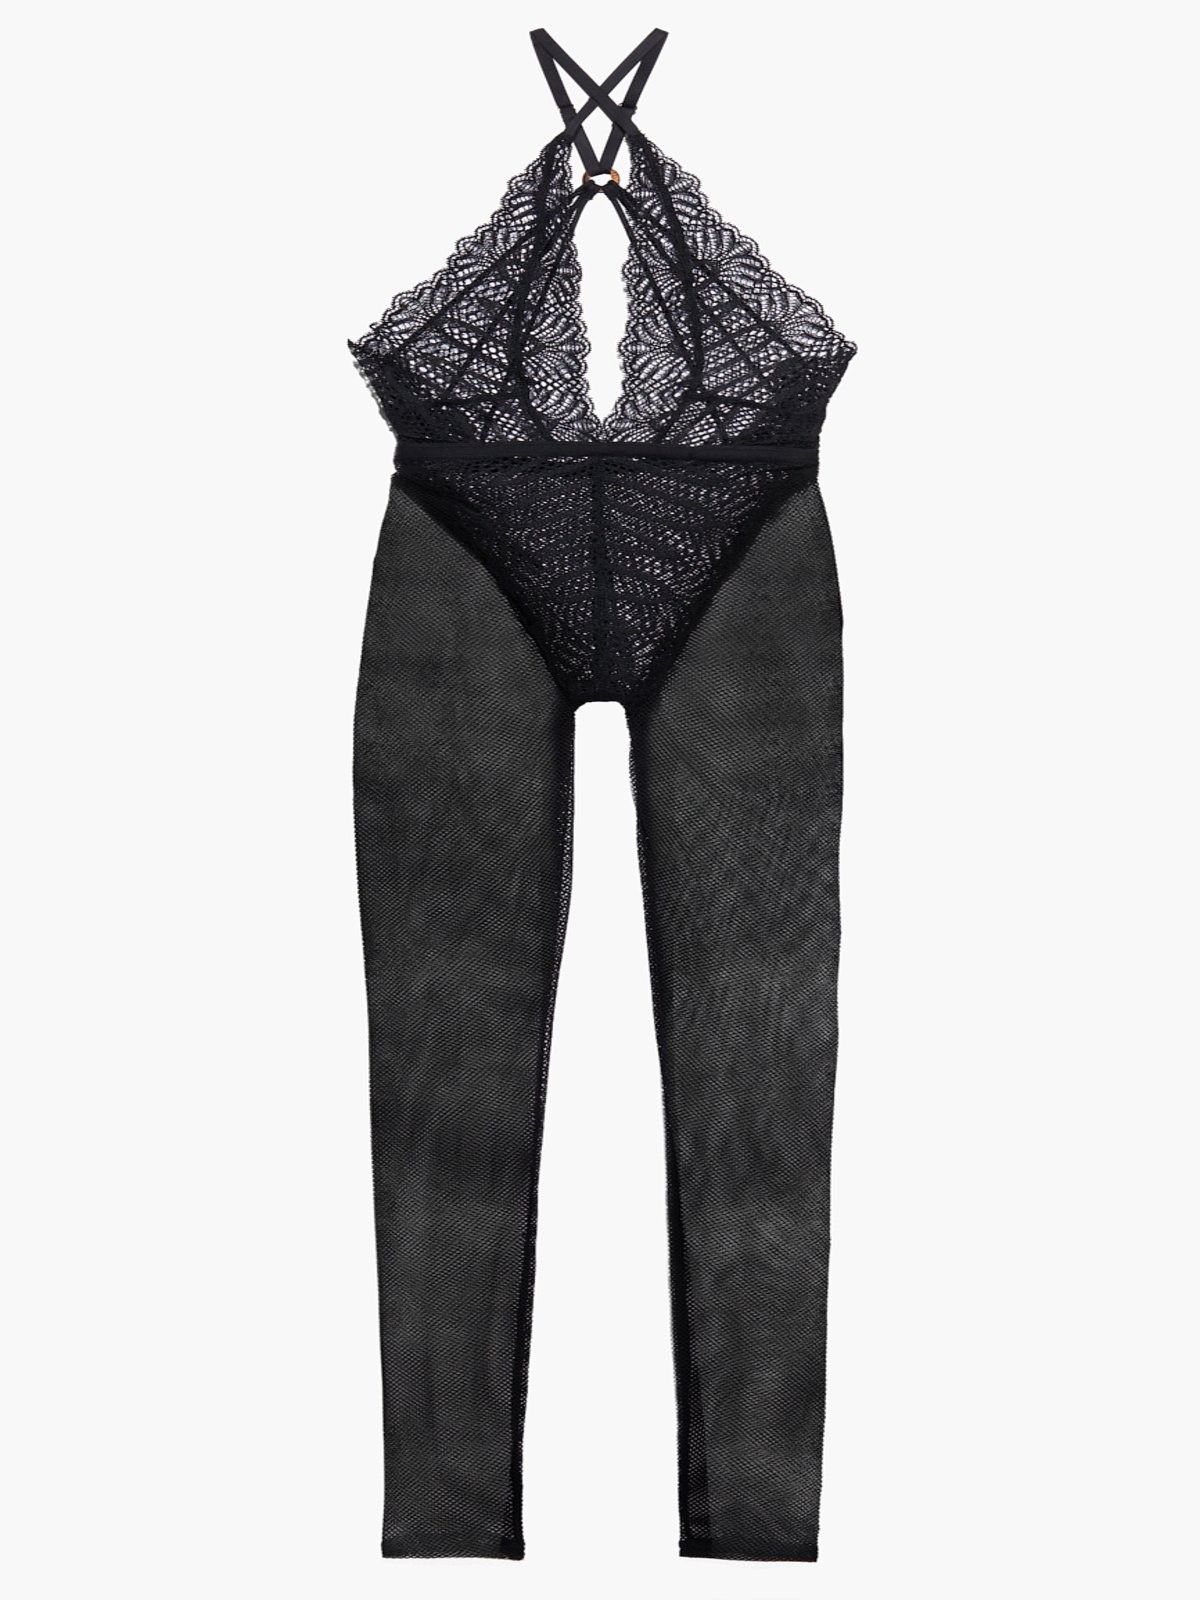 Stranded In Lace Crochet Catsuit in Black | SAVAGE X FENTY France